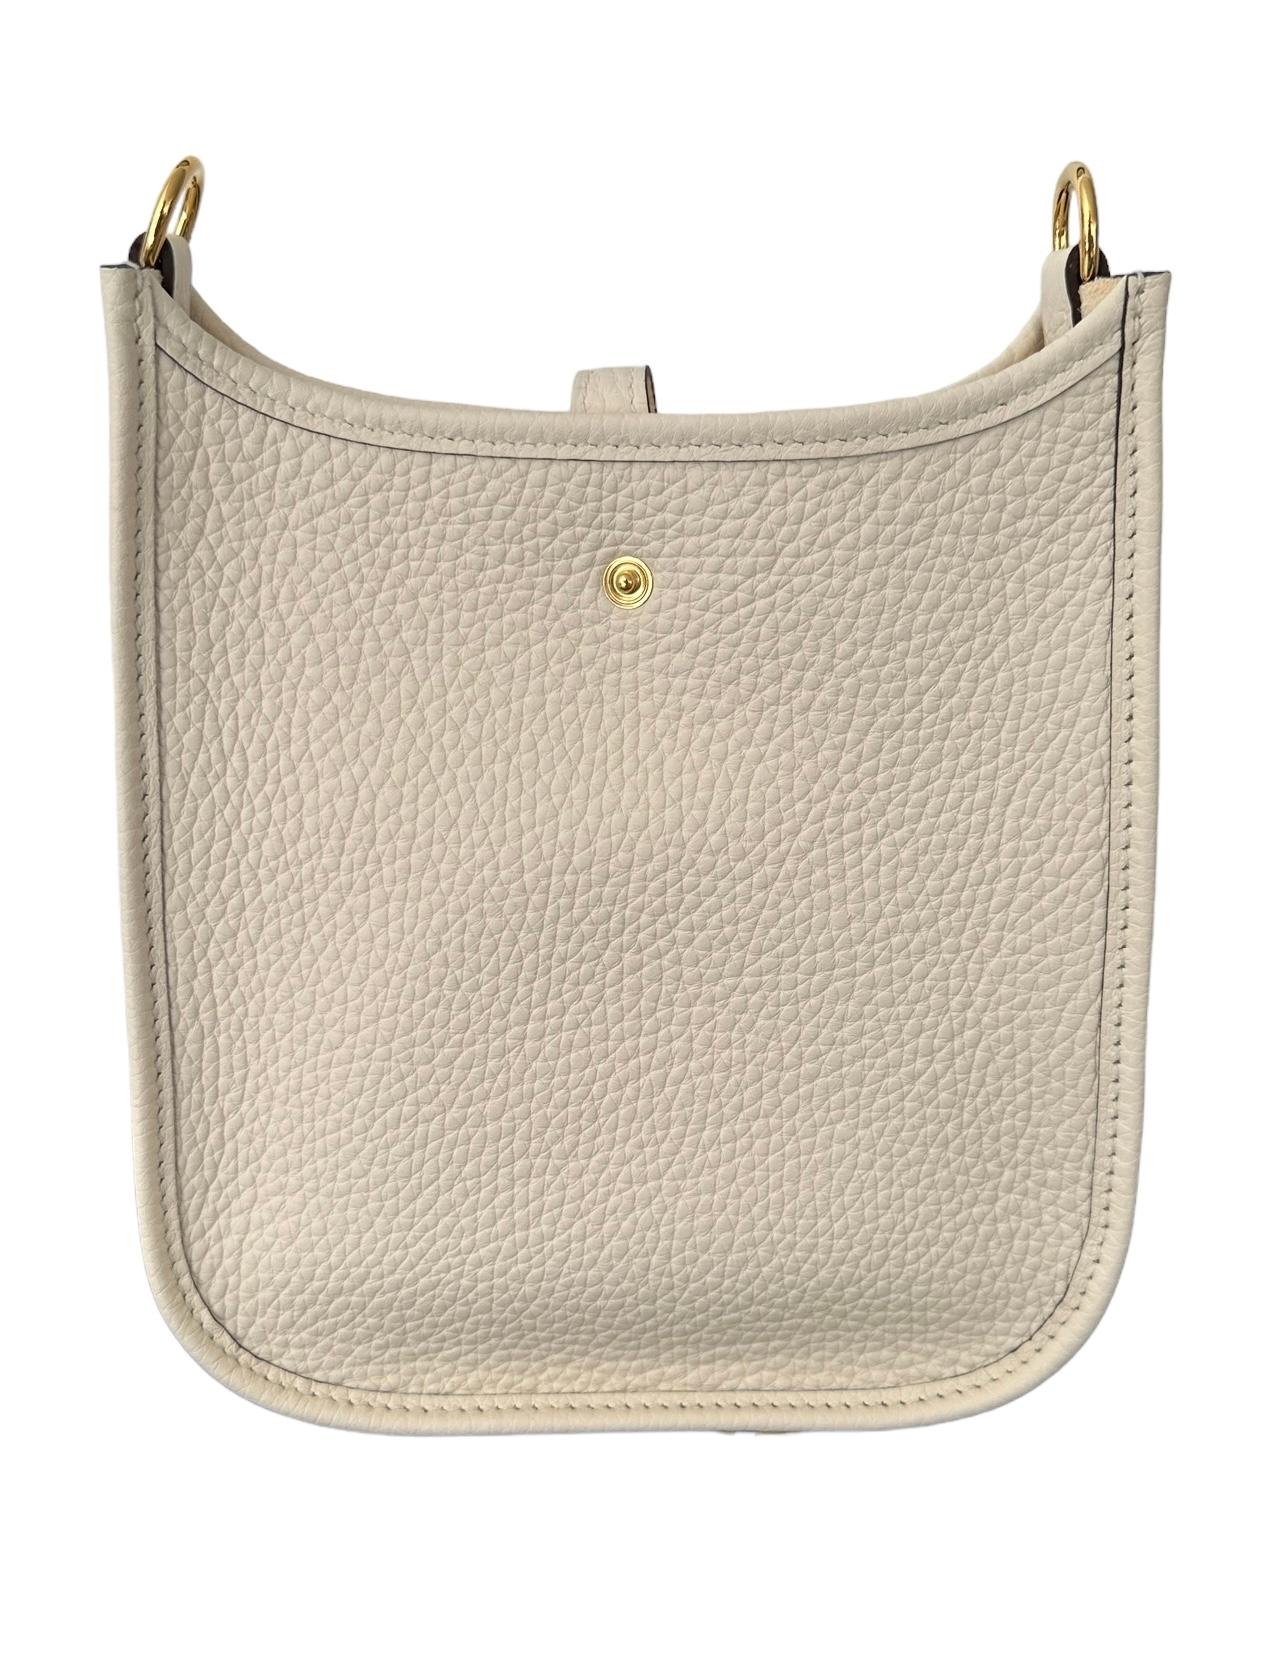 Hermes Evelyne Tpm 16
We have it in stock, ready, store fresh

This is the mini, the smallest size they make
Think spring summer
One of the prettiest colors
NATA, A CREAMY WHITE
Nata Strap

Collection 
Natural  interior
Gold  plated hardware
Hermes